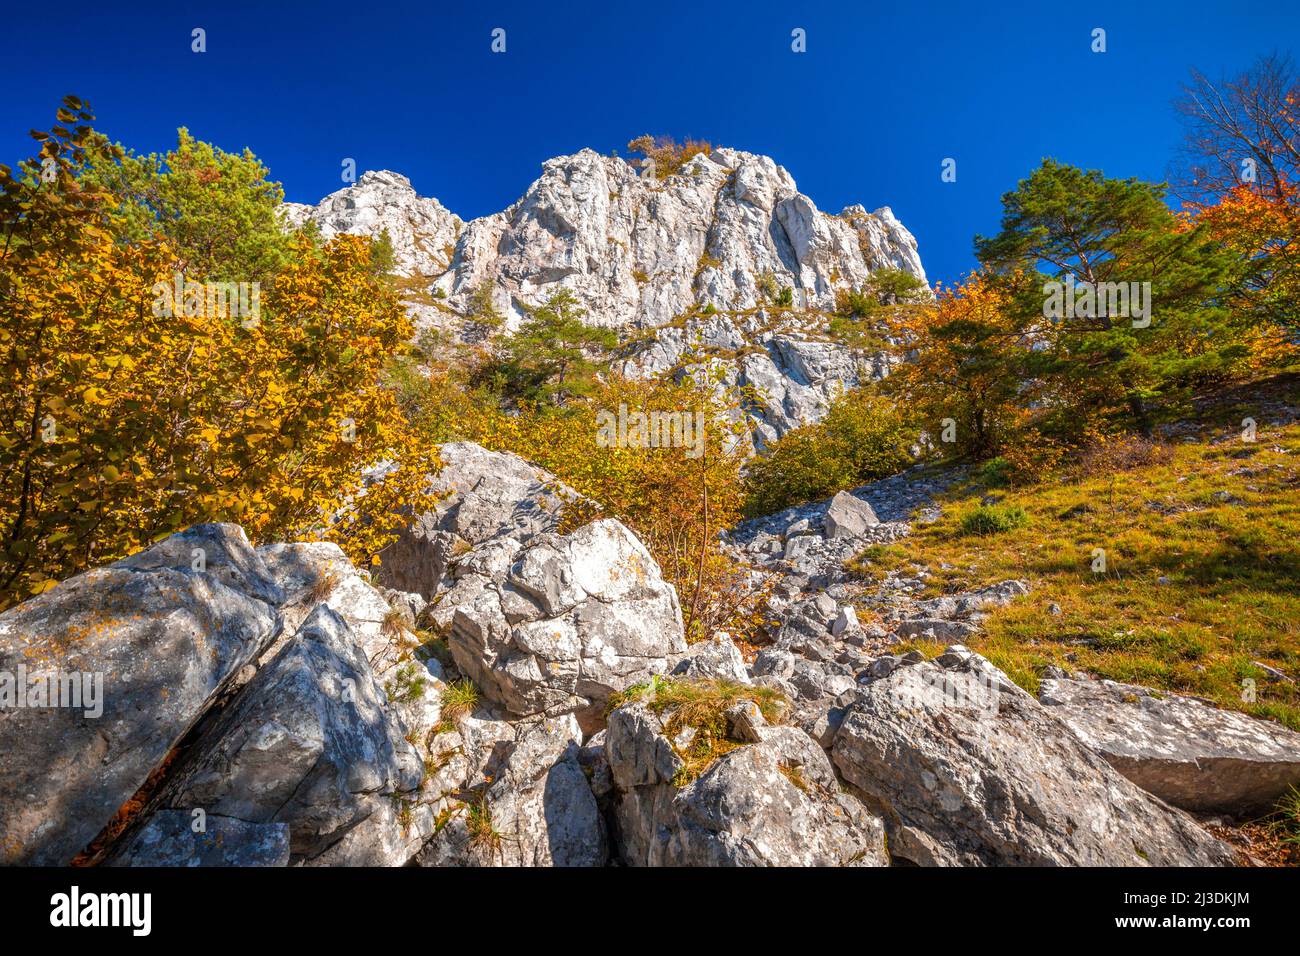 Autumn landscape with the Vapec hill in The Strazov Mountains in northwestern Slovakia, Europe. Stock Photo